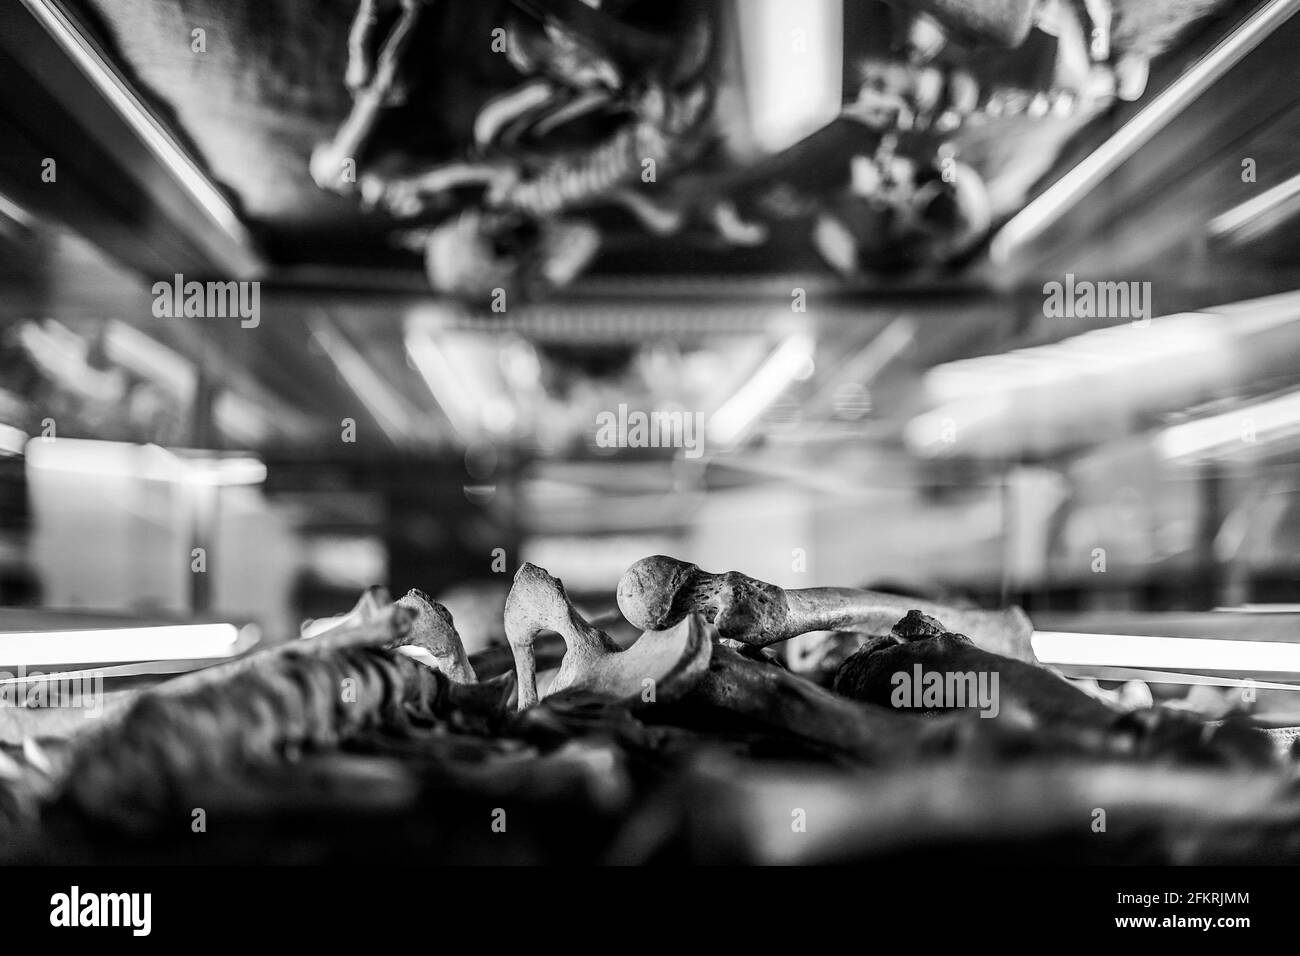 Napoli, ITALIA. 2nd May, 2020. 03/05/2021 Naples, the long-awaited exhibition on Gladiators at the National Archaeological Museum of Naples open to the public Credit: Fabio Sasso/ZUMA Wire/Alamy Live News Stock Photo